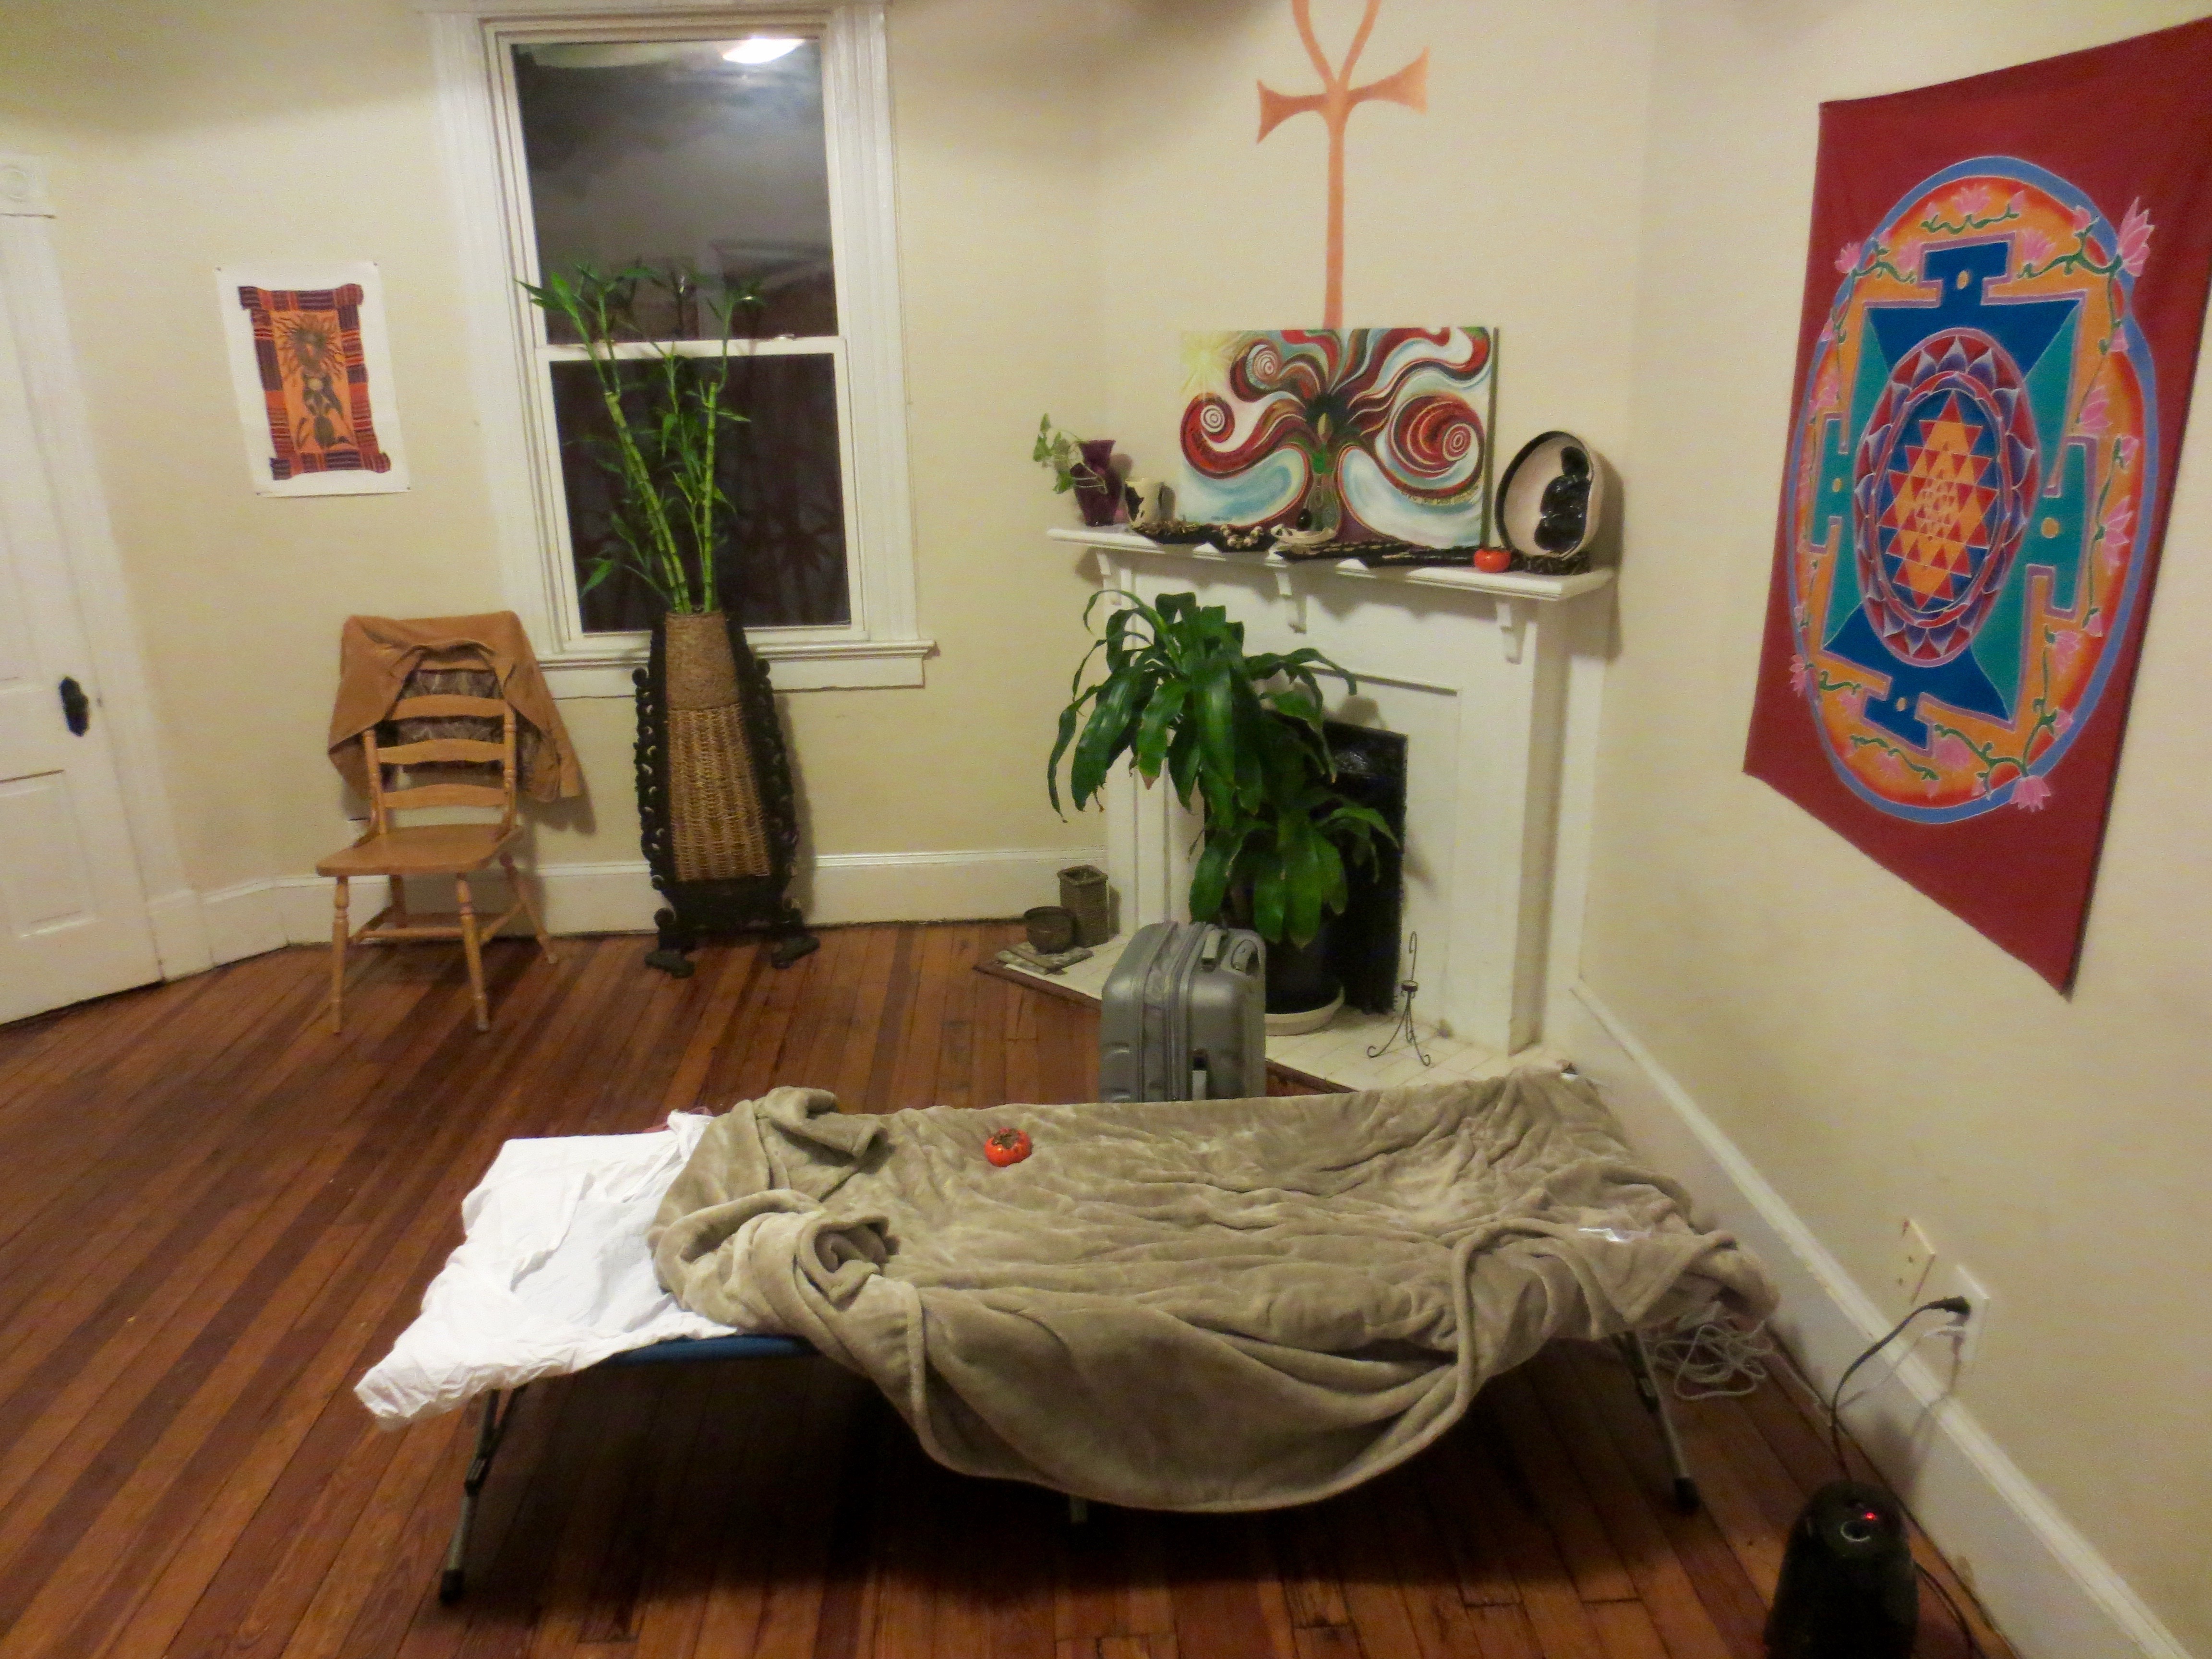 I was given refuge in this temple for 2 nights during the cold, rainy nights. This cot and electric blanket were alms provided by someone else who crossed my path. All the alms came together beautifully, wouldn't you say? Atlanta, USA